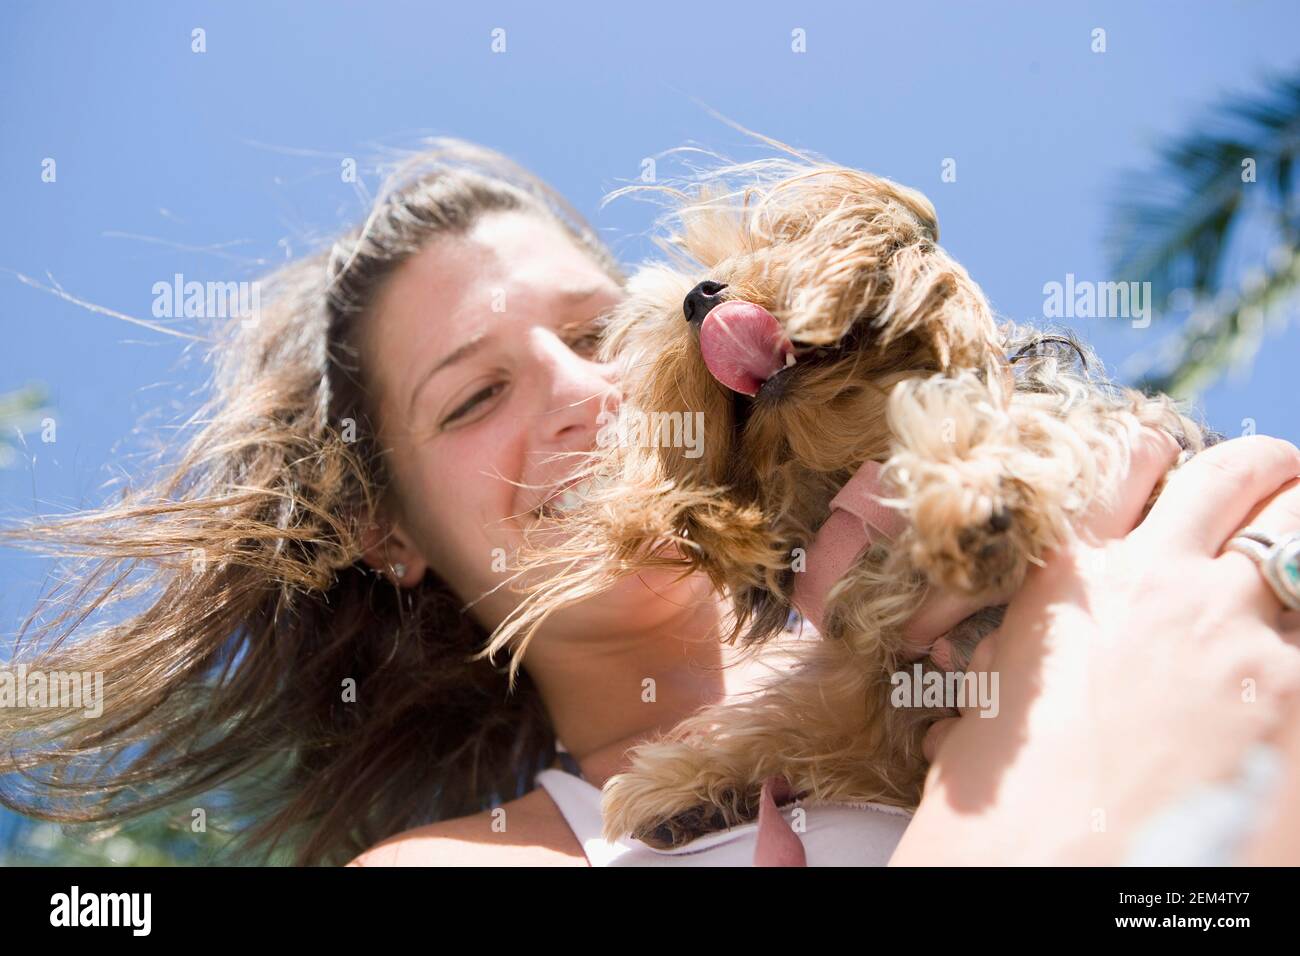 Close-up of a young woman holding her dog and smiling Stock Photo